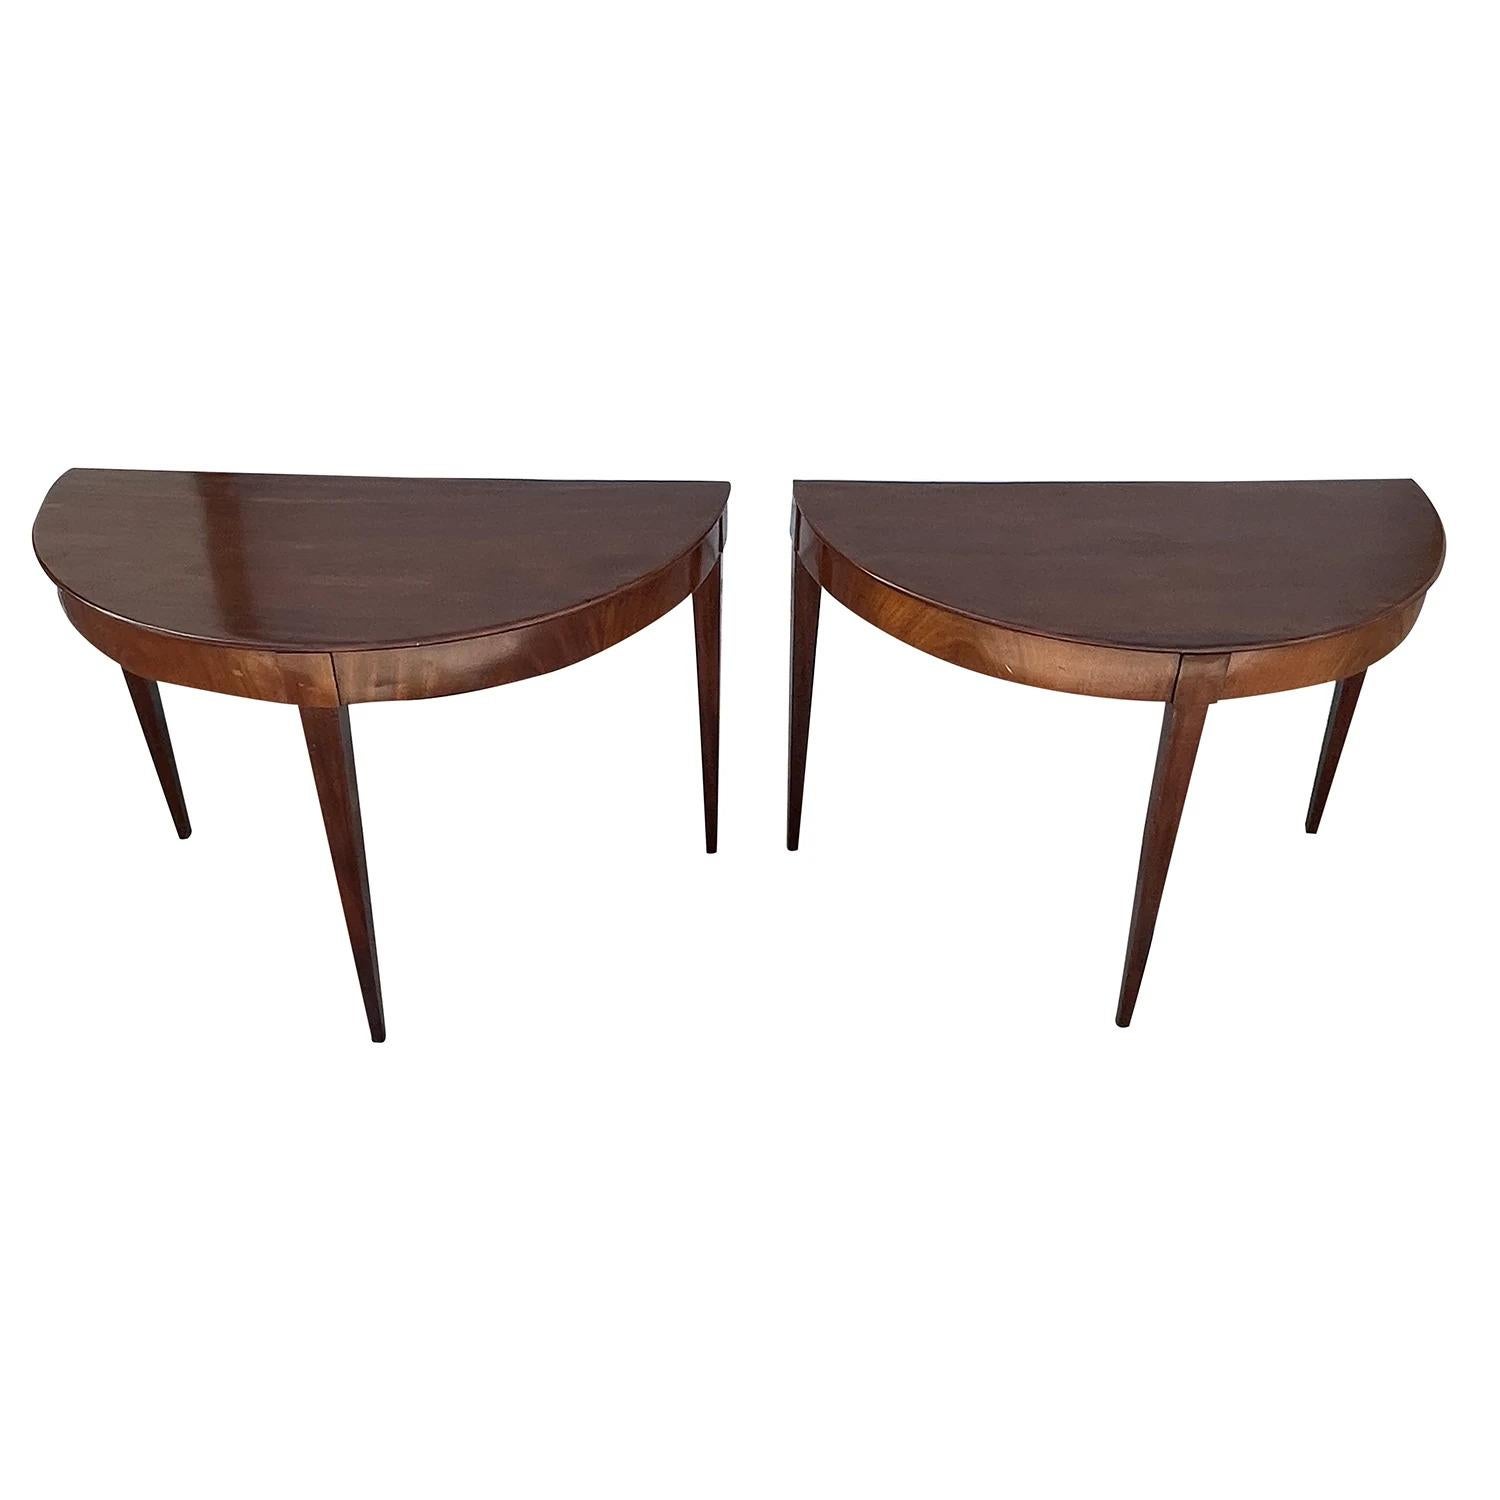 A dark-brown, antique Swedish Gustavian pair of Demi-lune, side tables made of hand crafted veneered Mahogany, in good condition. The half round, moon shaped polished console tables were original dining tables. Wear consistent with age and use.